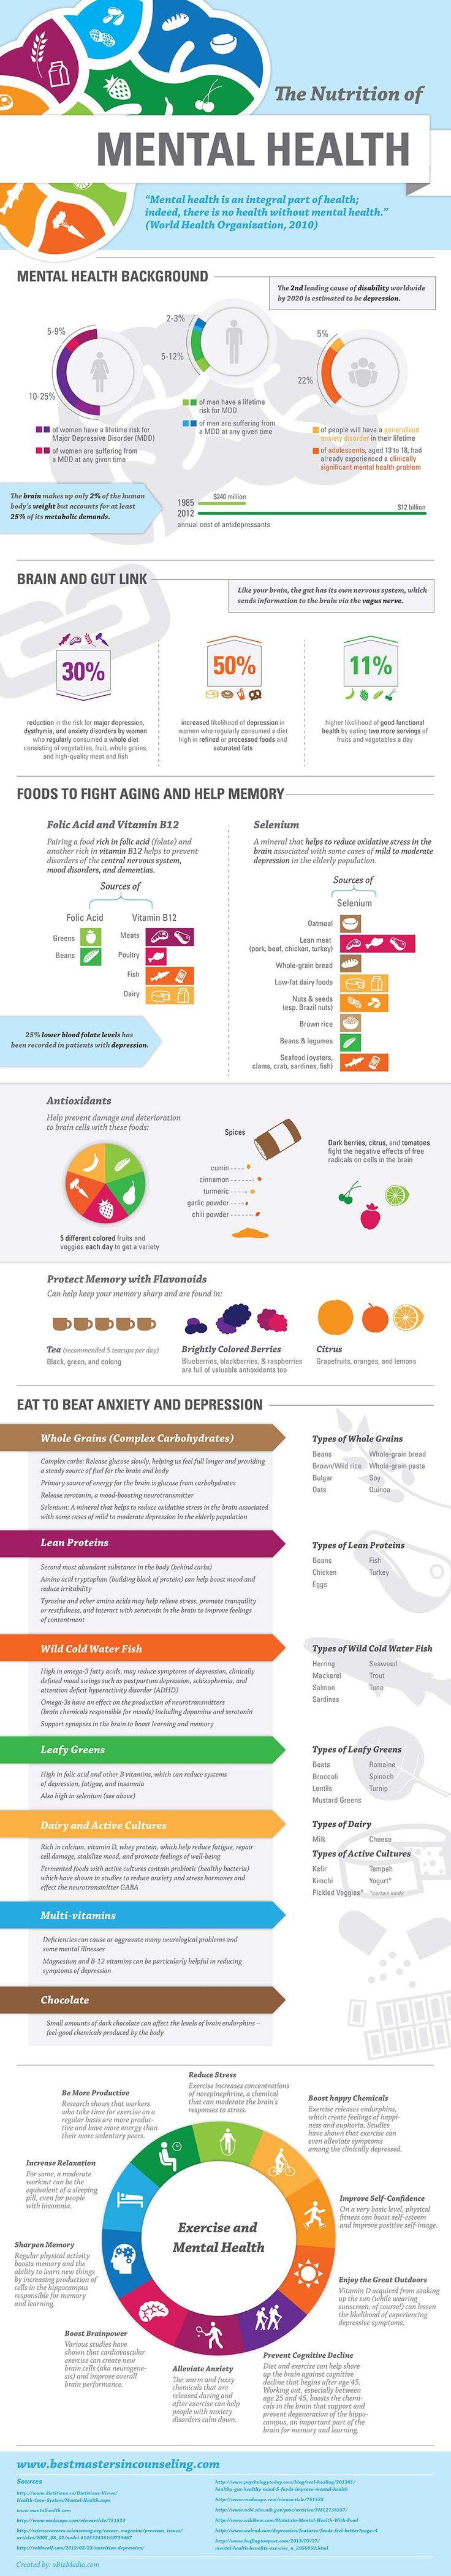 Wedding - Infographic: Nutrition For Mental Health